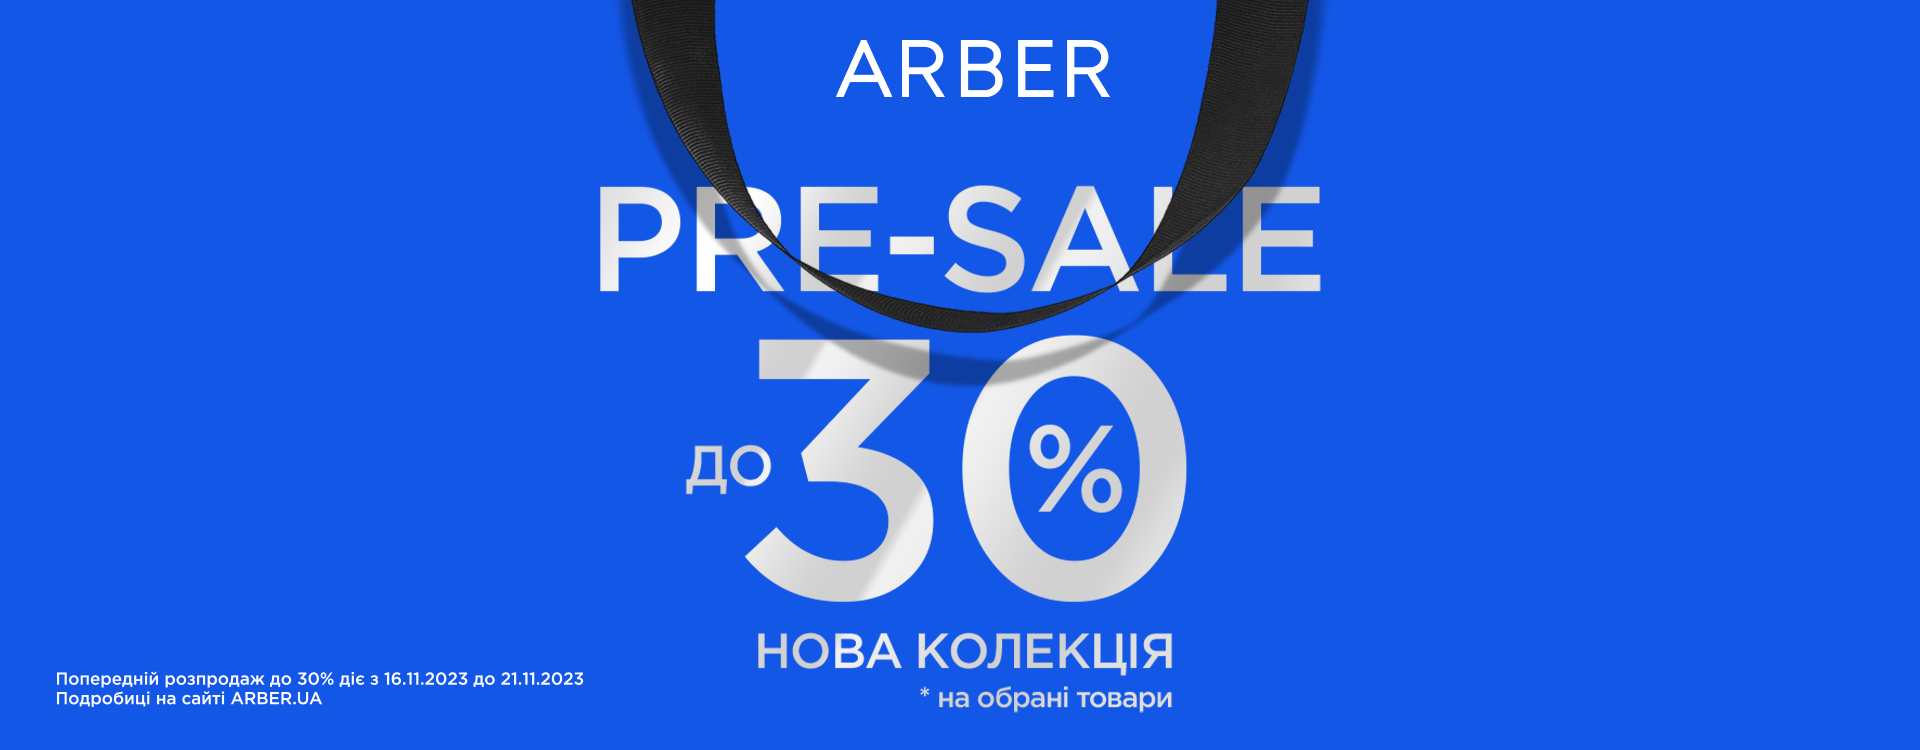 PRE-SALE and autumn discounts in ARBER